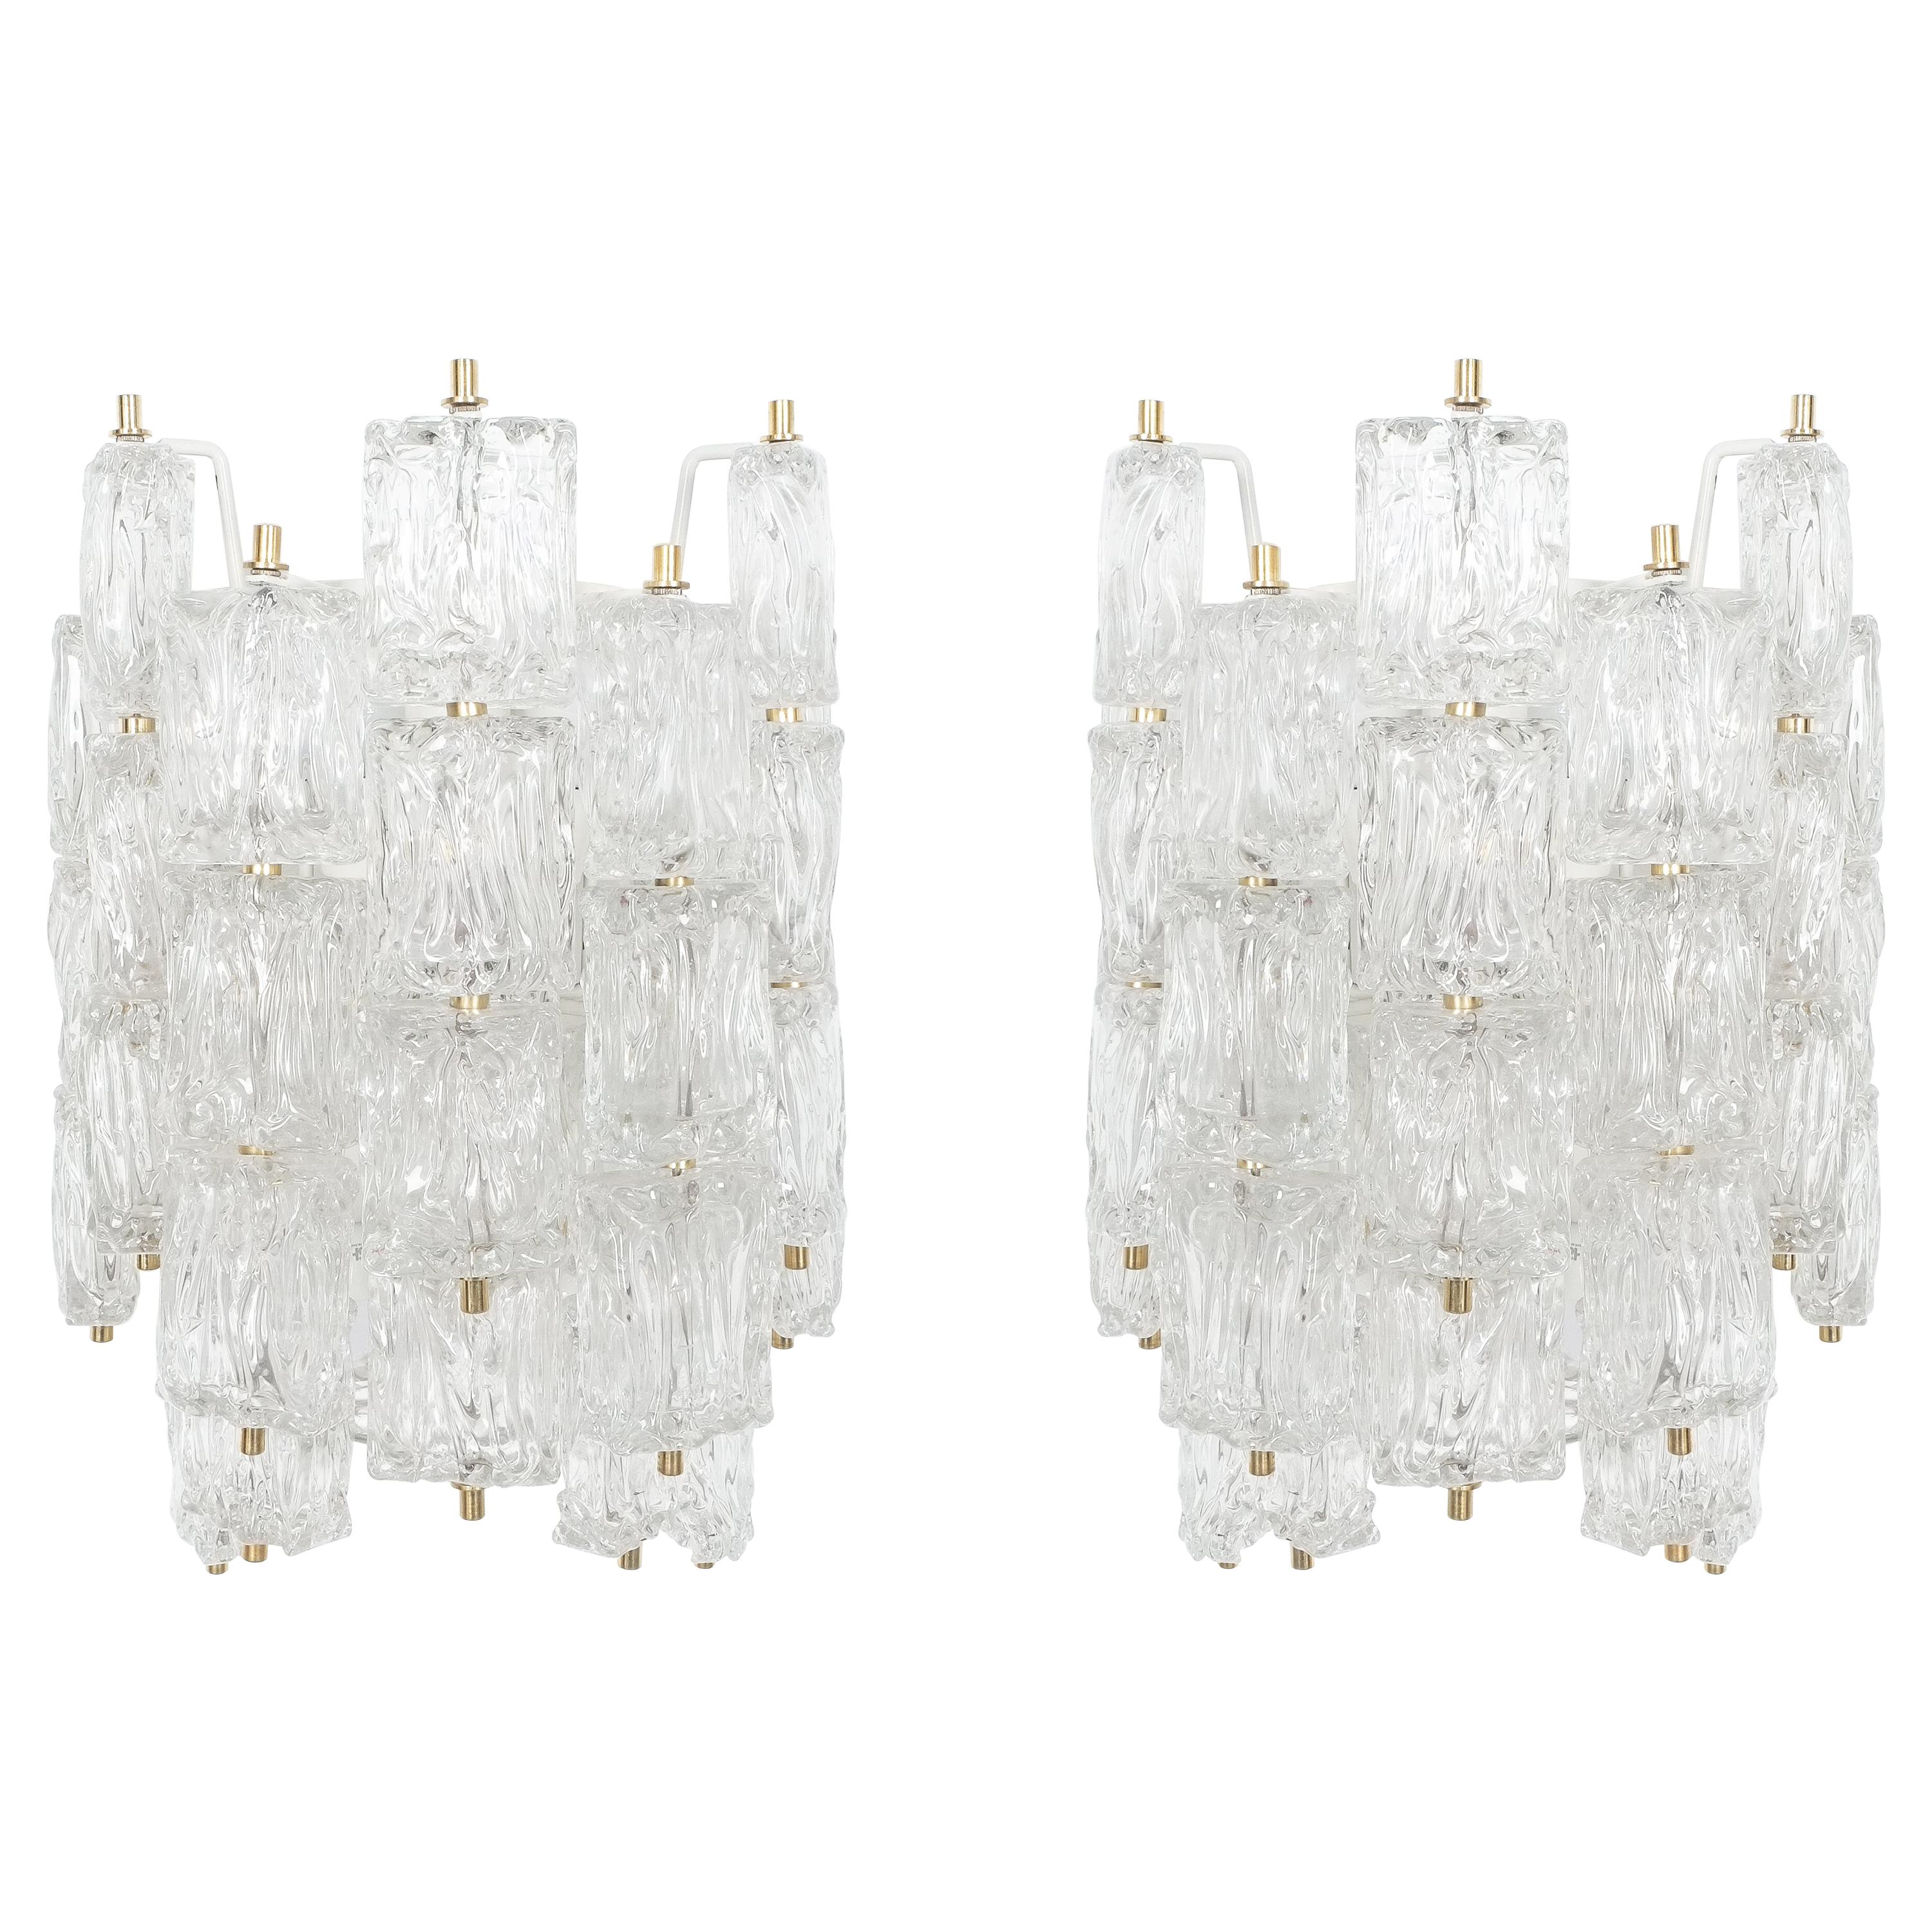 Barovier Toso Sconces Wall Lights Pair Glass Brass, Italy